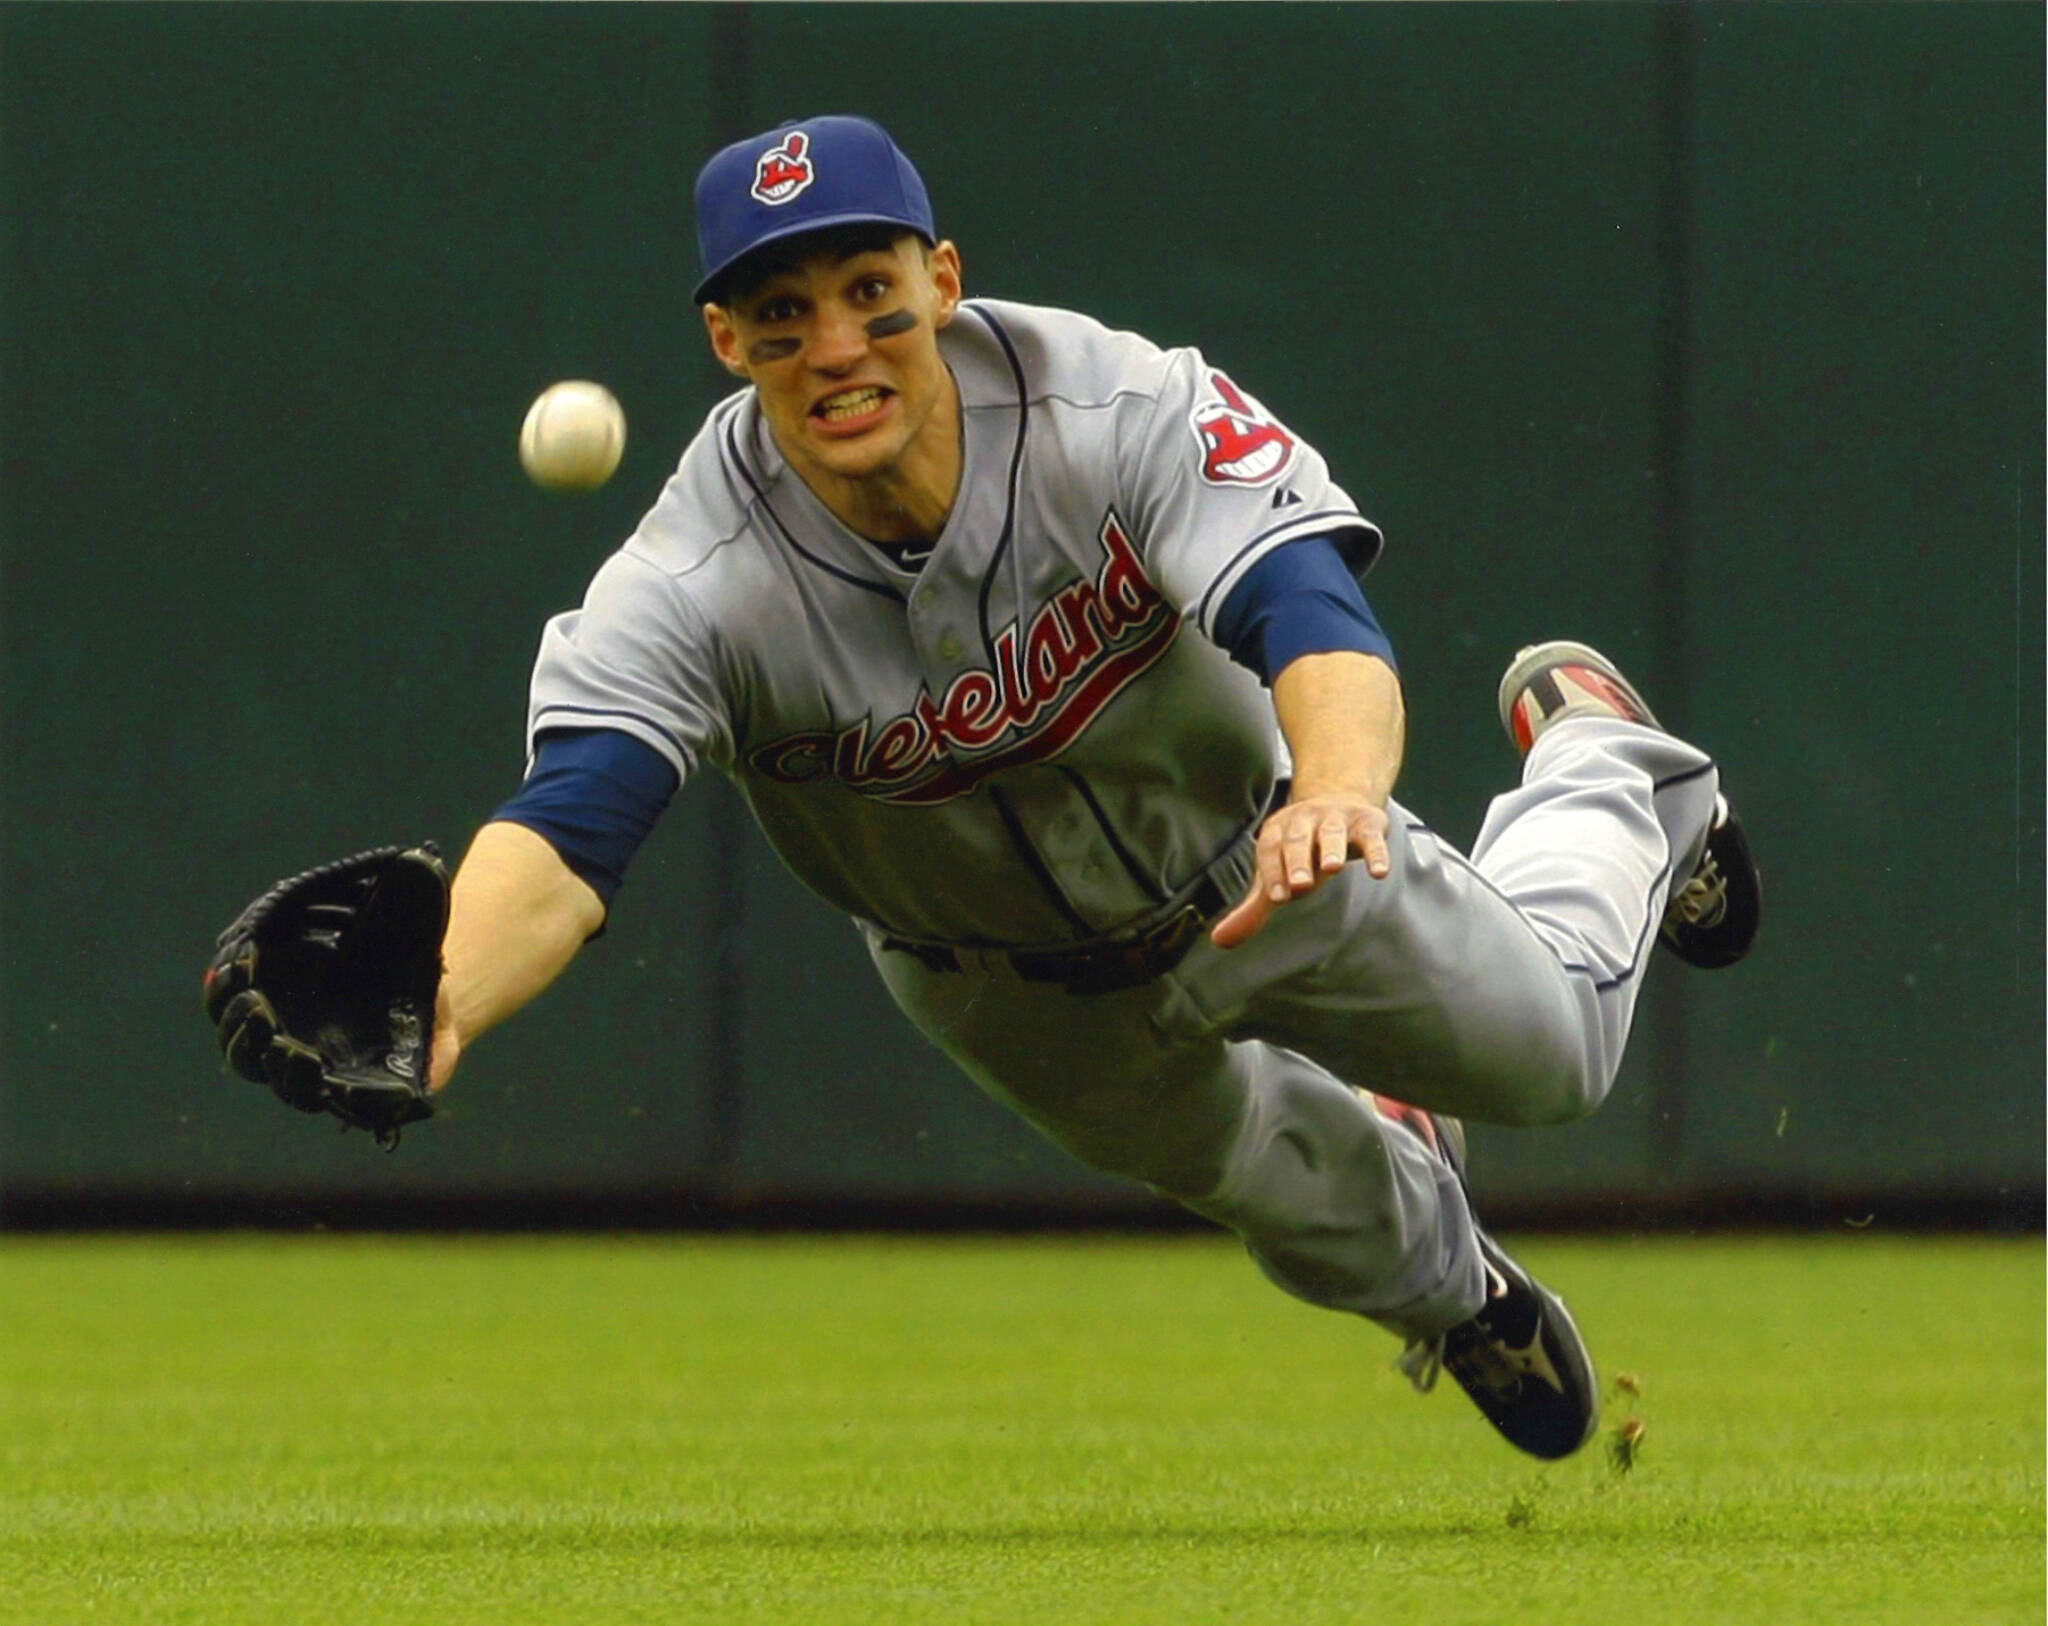 Cascade High School graduate Grady Sizemore during his time with MLB’s Cleveland Indians. (Courtesy of Snohomish County Sports Commission)